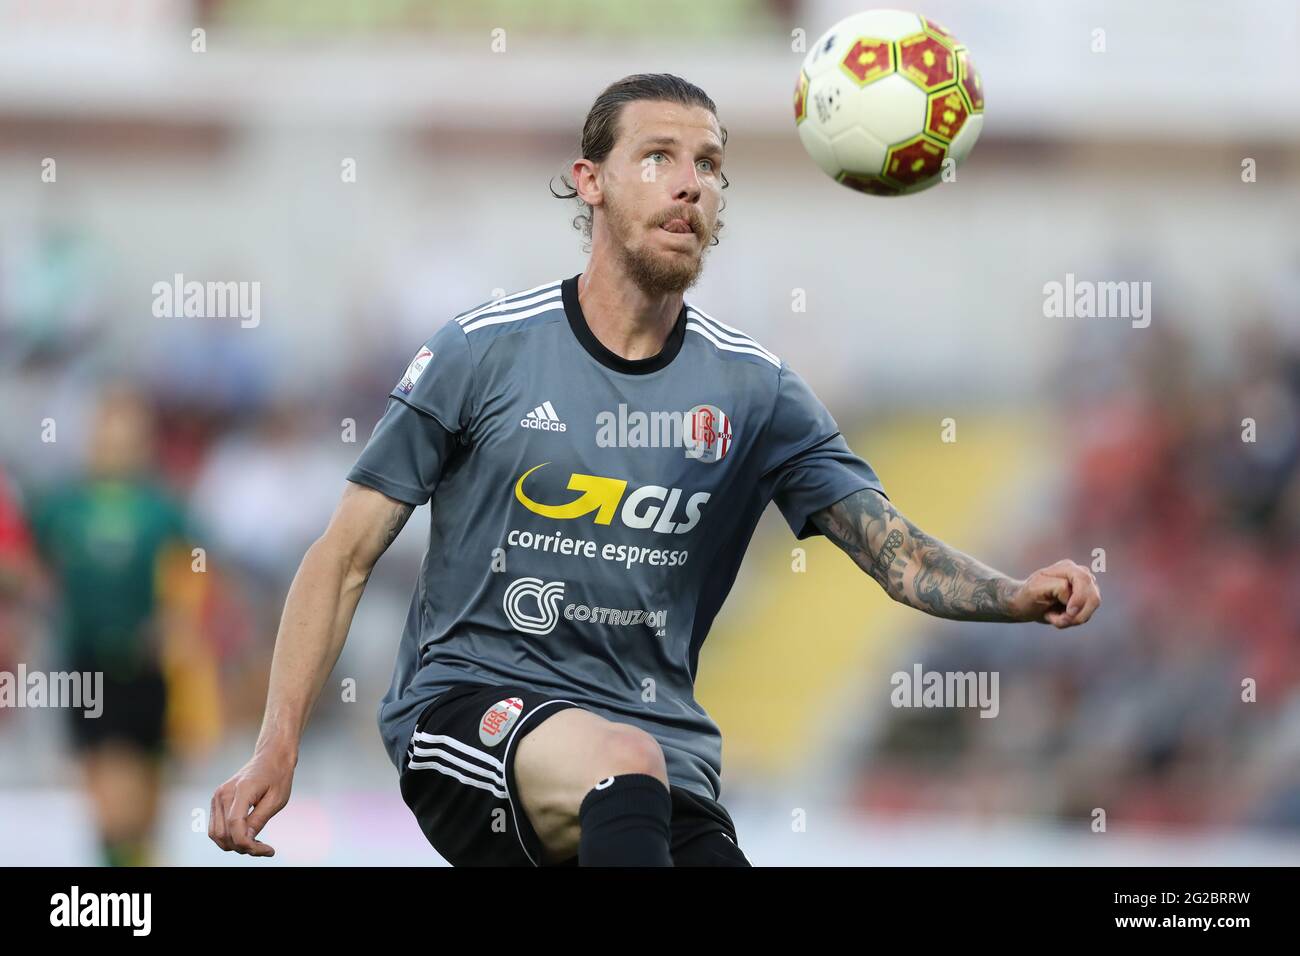 Alessandria, Italy, 9th June 2021. Simone Corazza of US Alessandria during the Serie C match at Stadio Giuseppe Moccagatta - Alessandria, Torino. Picture credit should read: Jonathan Moscrop / Sportimage Credit: Sportimage/Alamy Live News Stock Photo